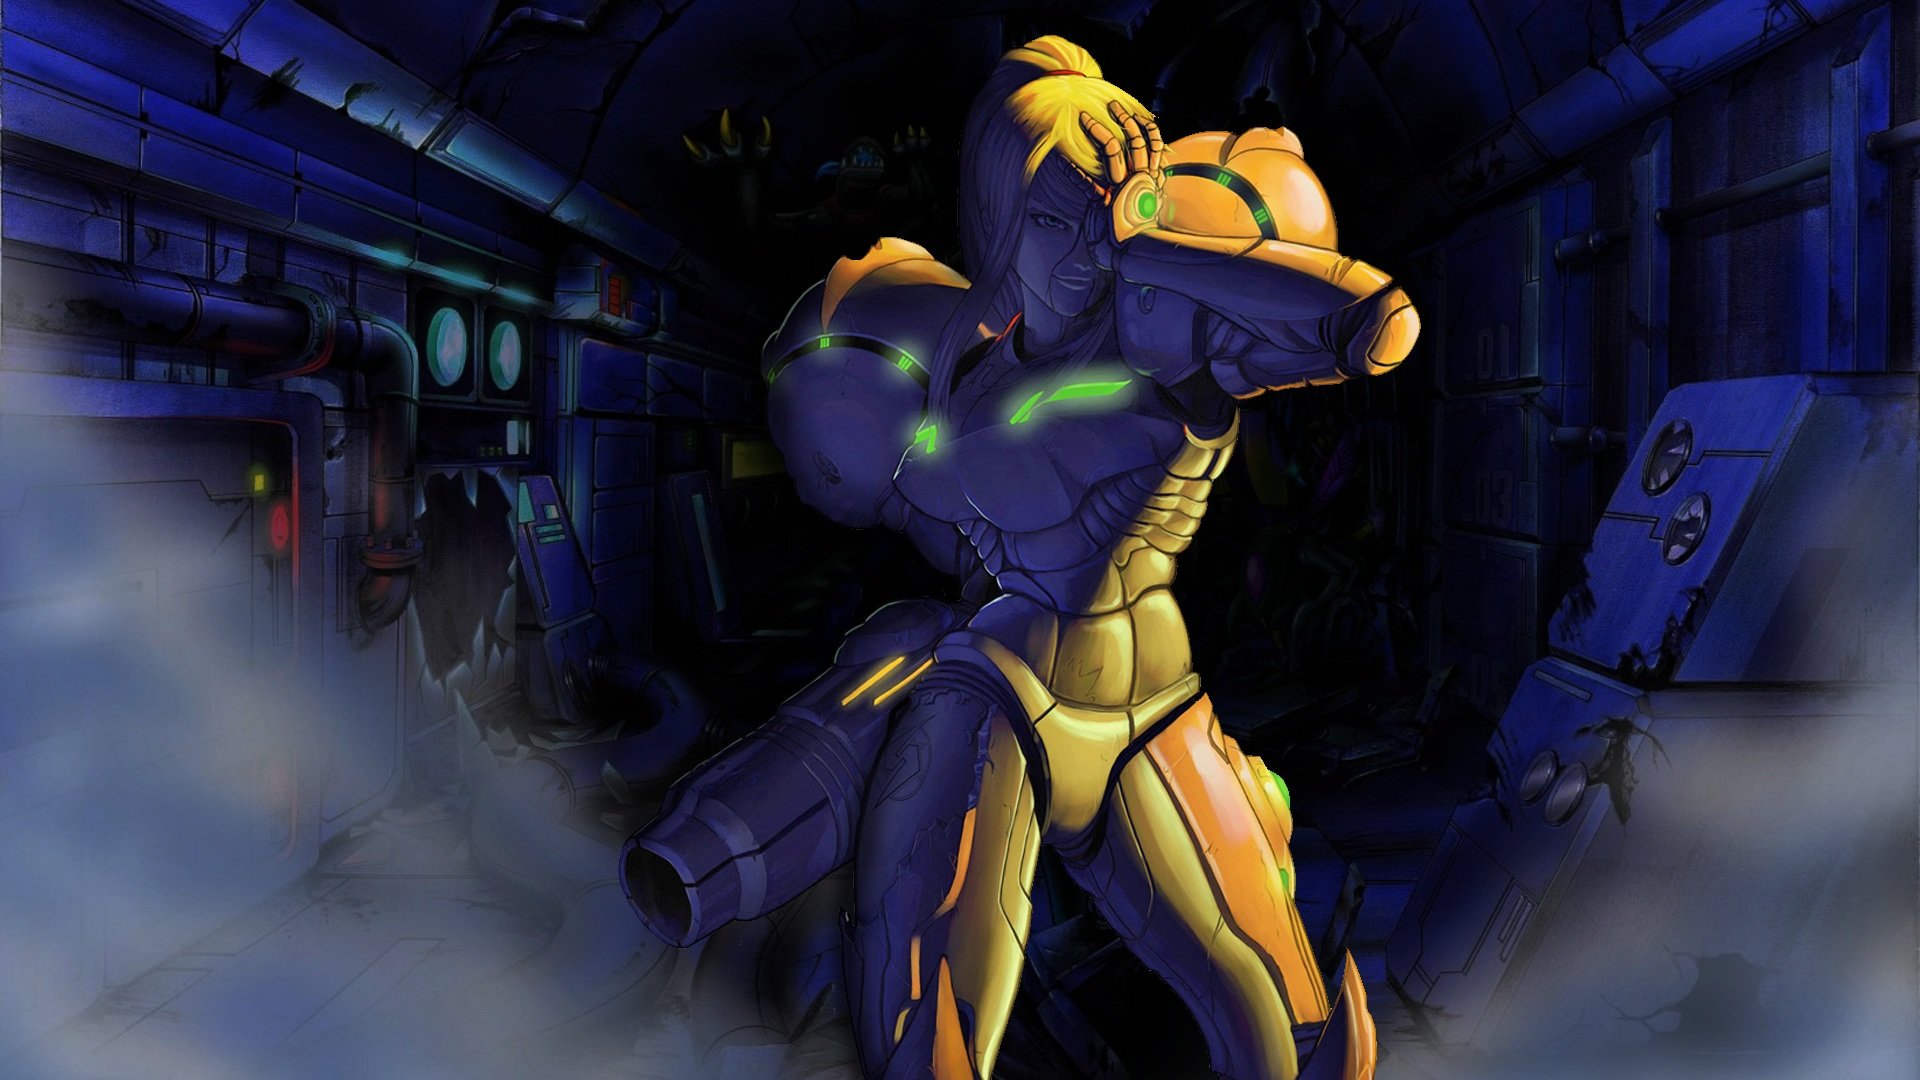 Download full hd 1920x1080 Metroid PC background ID:405490 for free